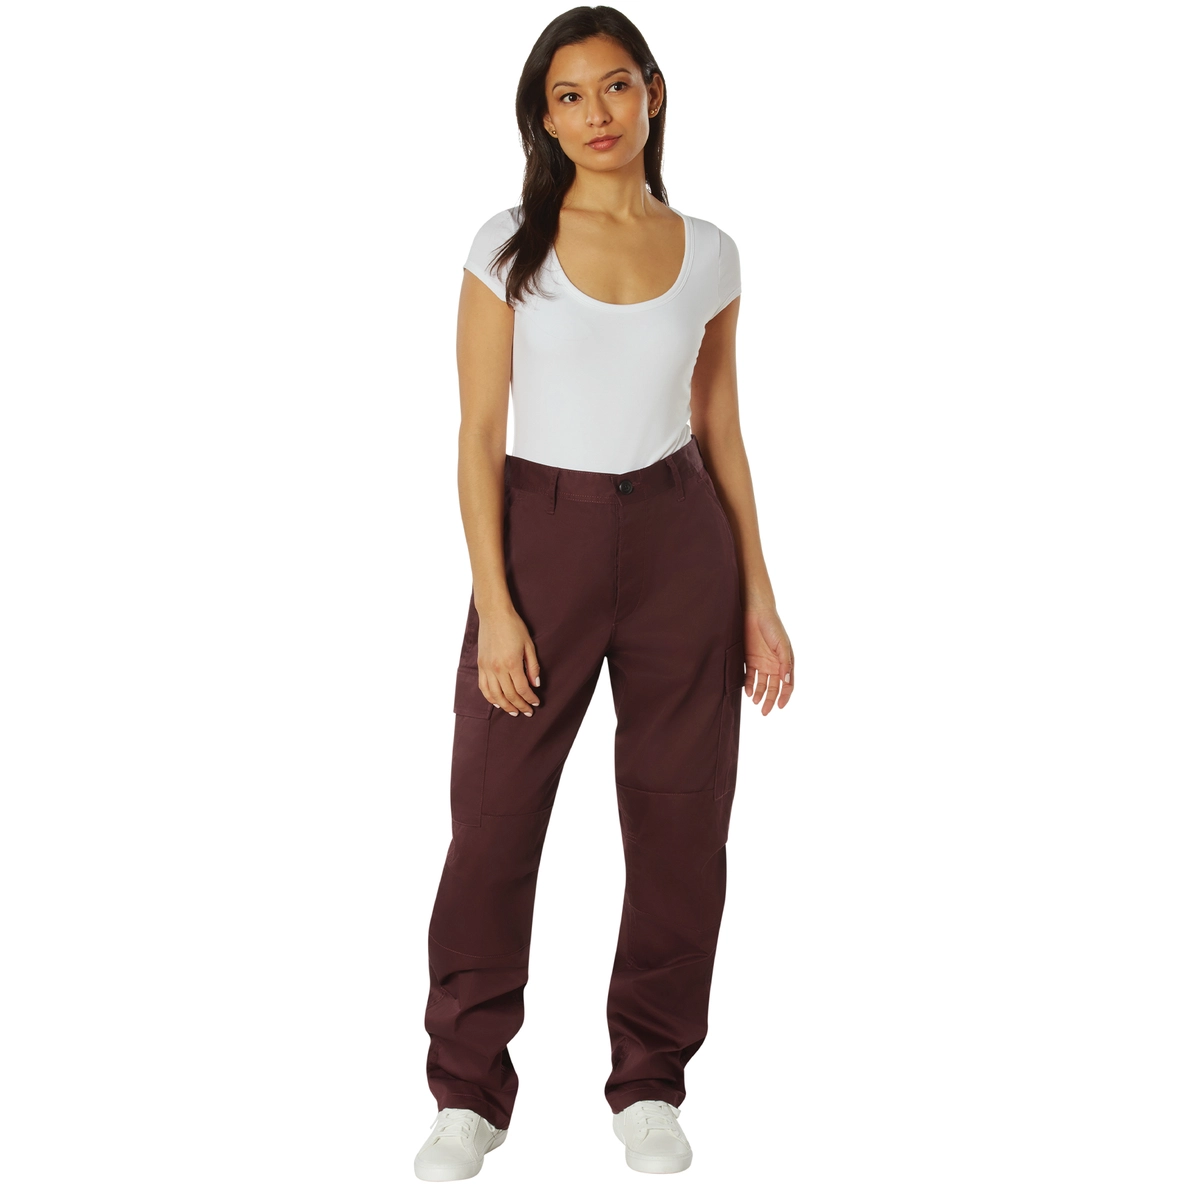 New maroon color cargo pants